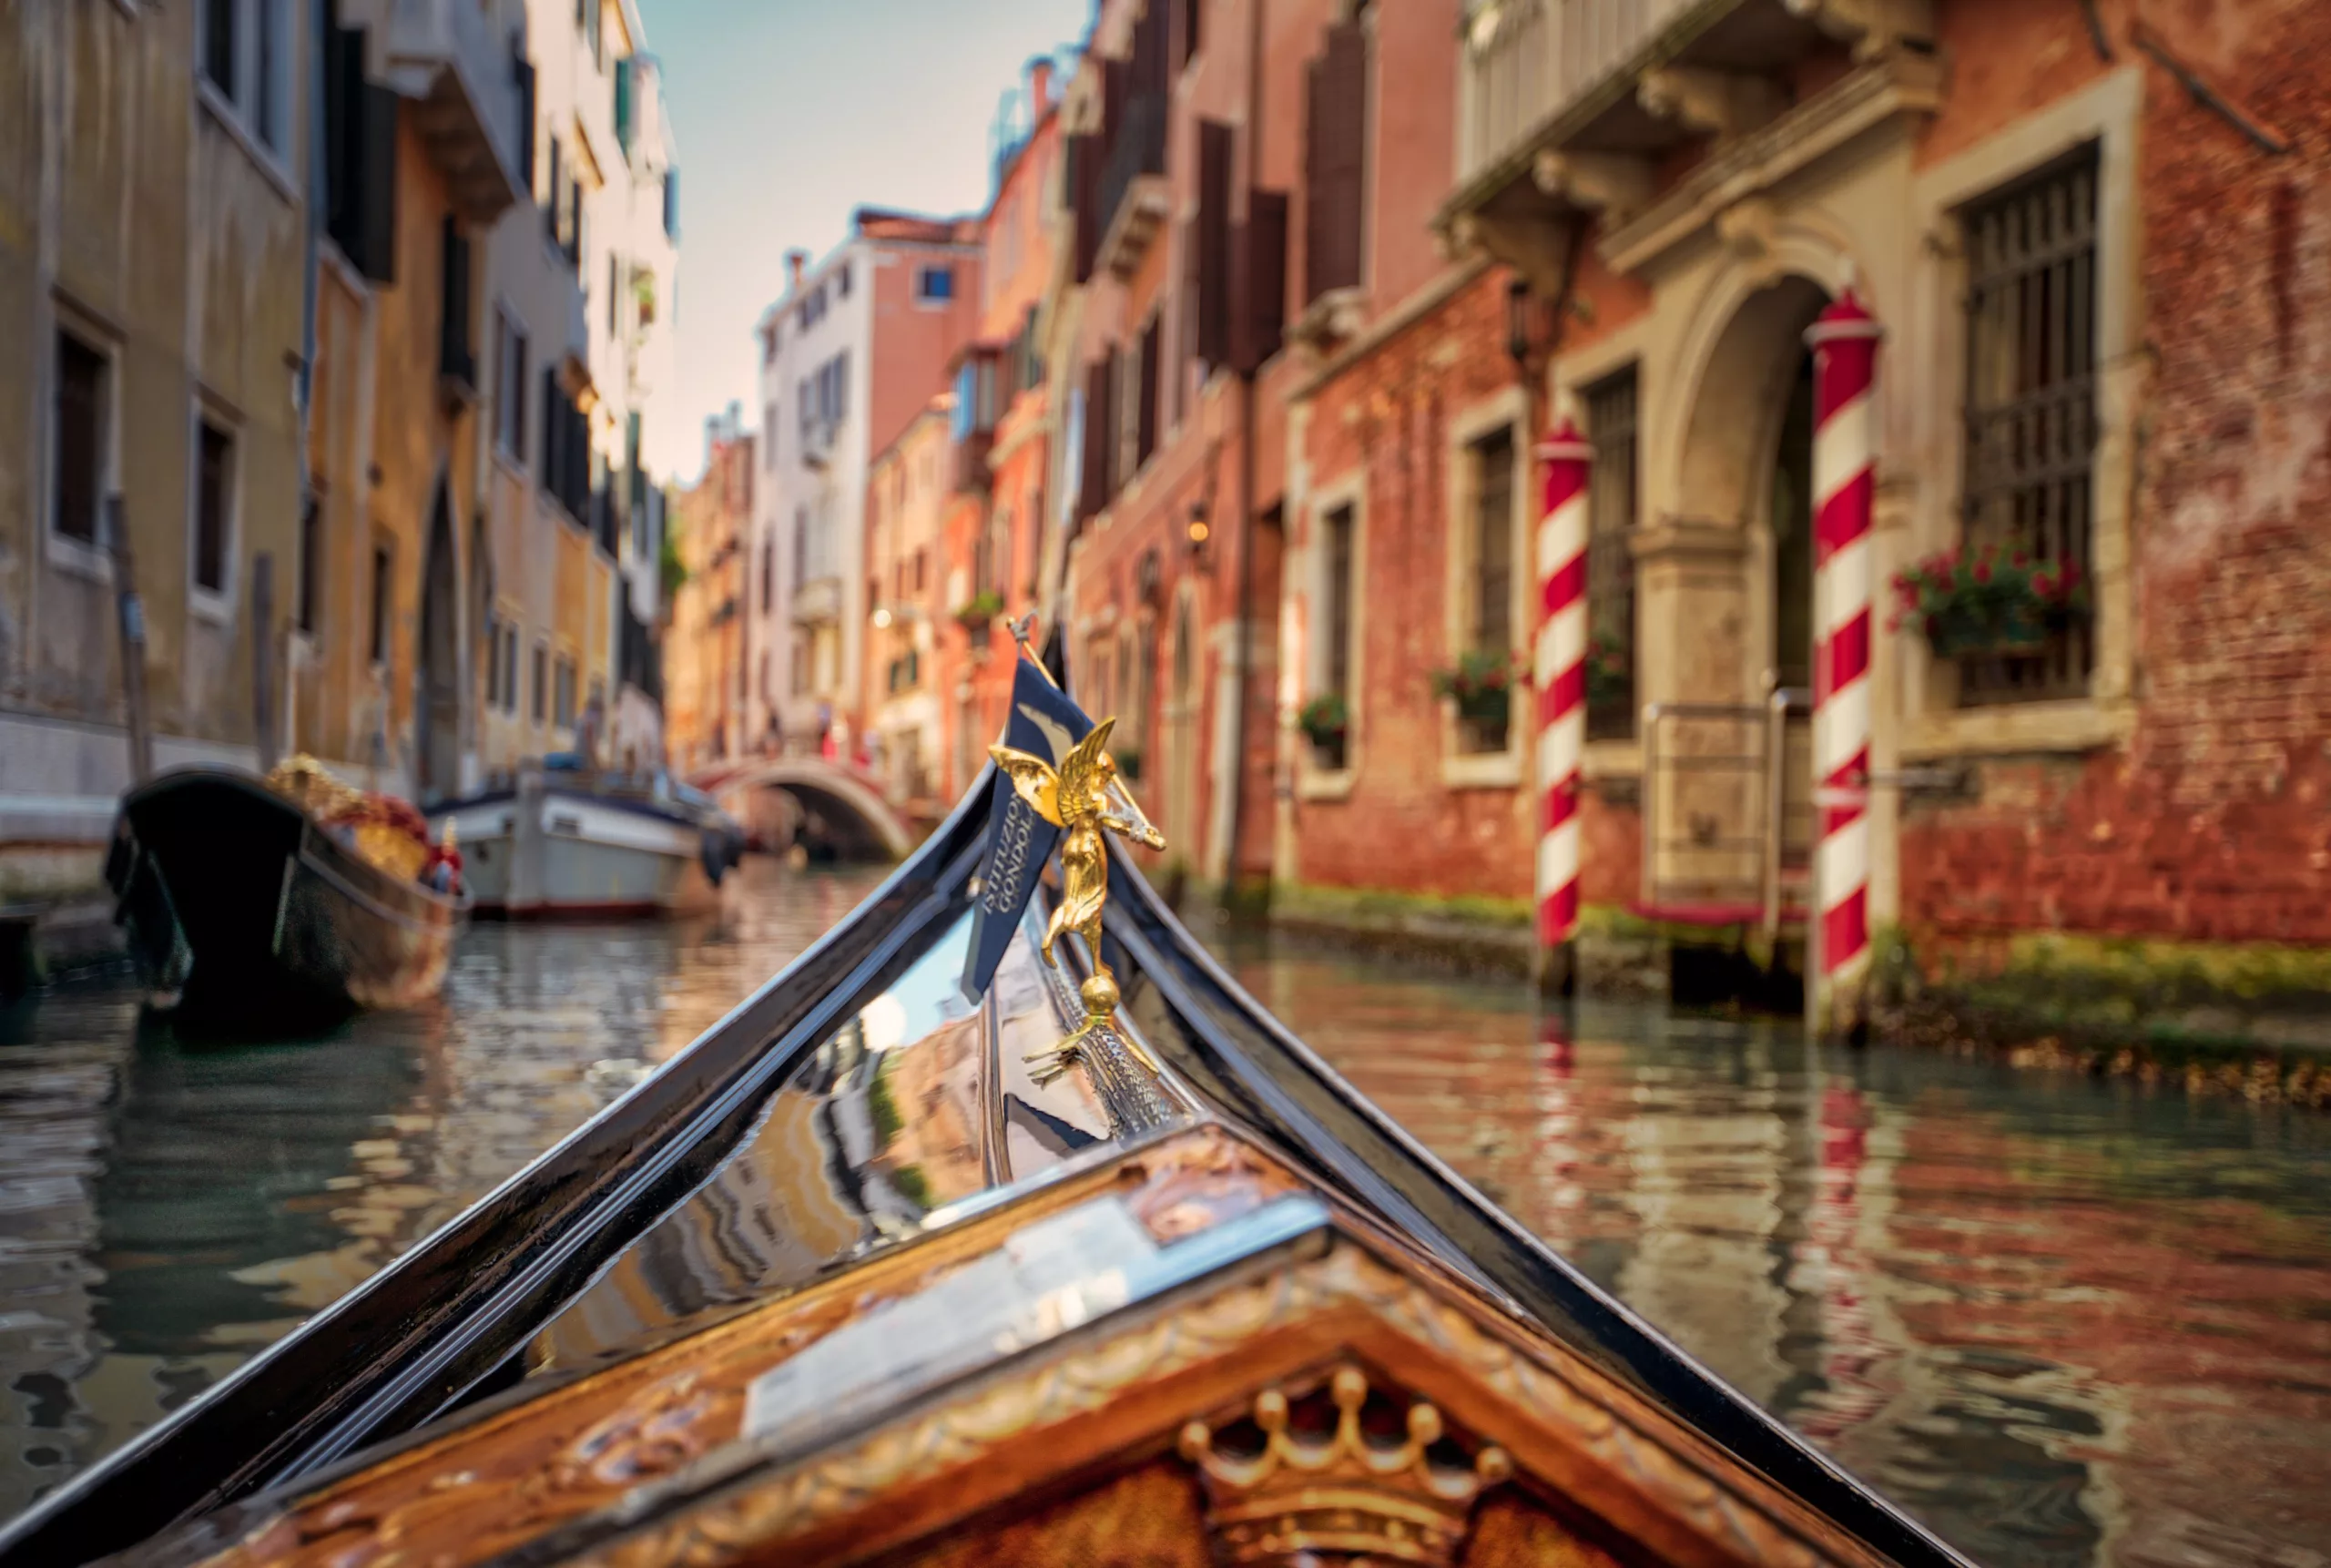 Venice Overtourism - How to tour Venice consciously and protect it for generations to come